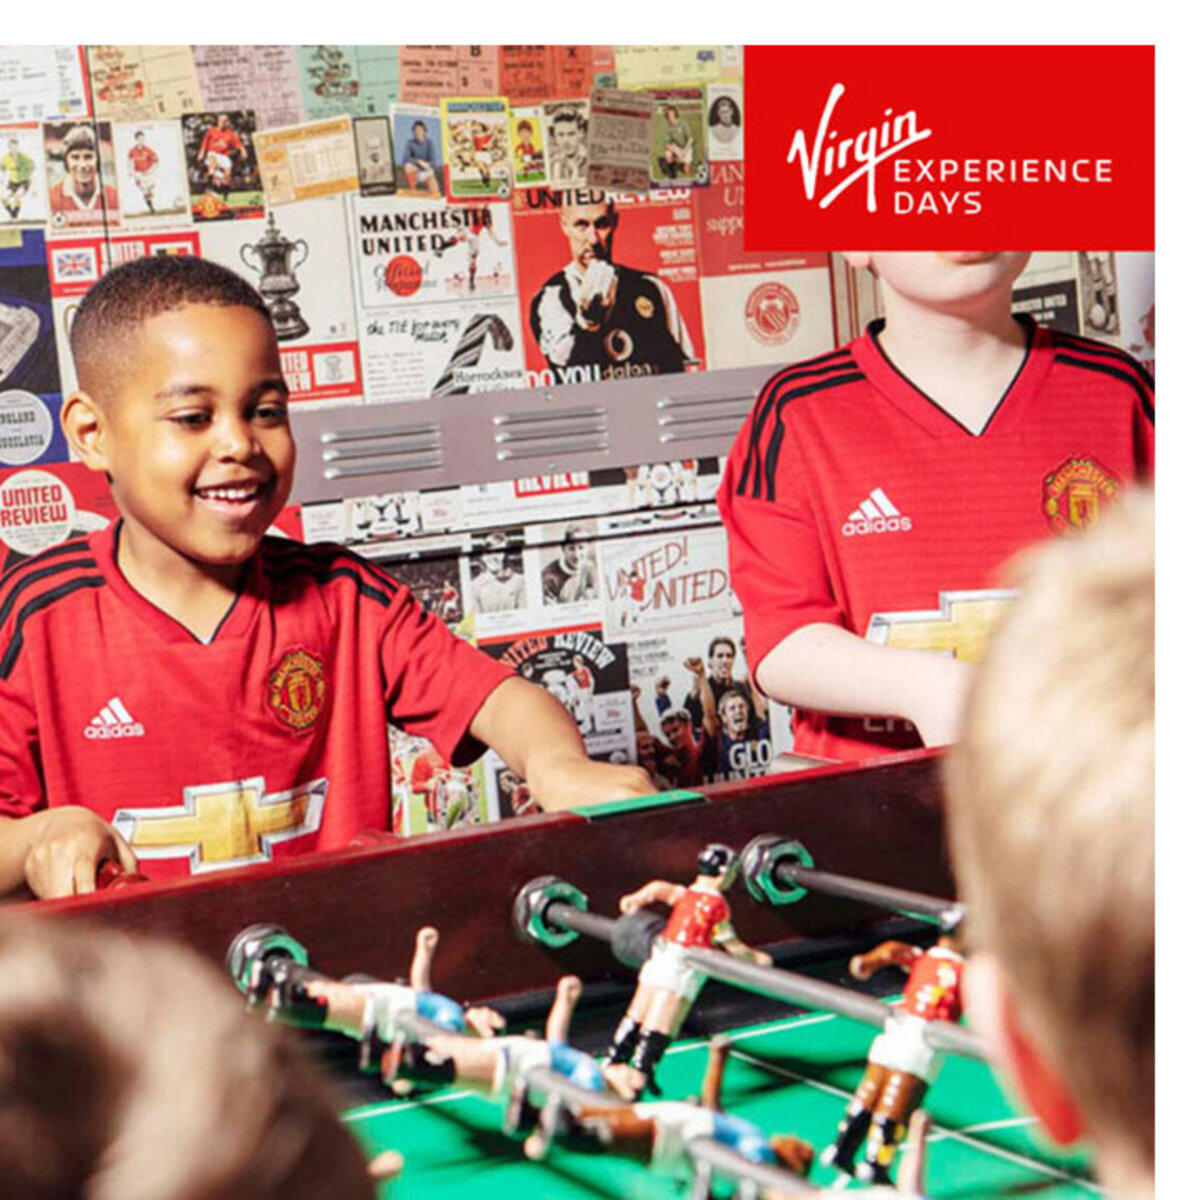 Virgin Experience Days Manchester United Football Club Stadium Tour with Meal in Red Café for Two People (16 Years +)